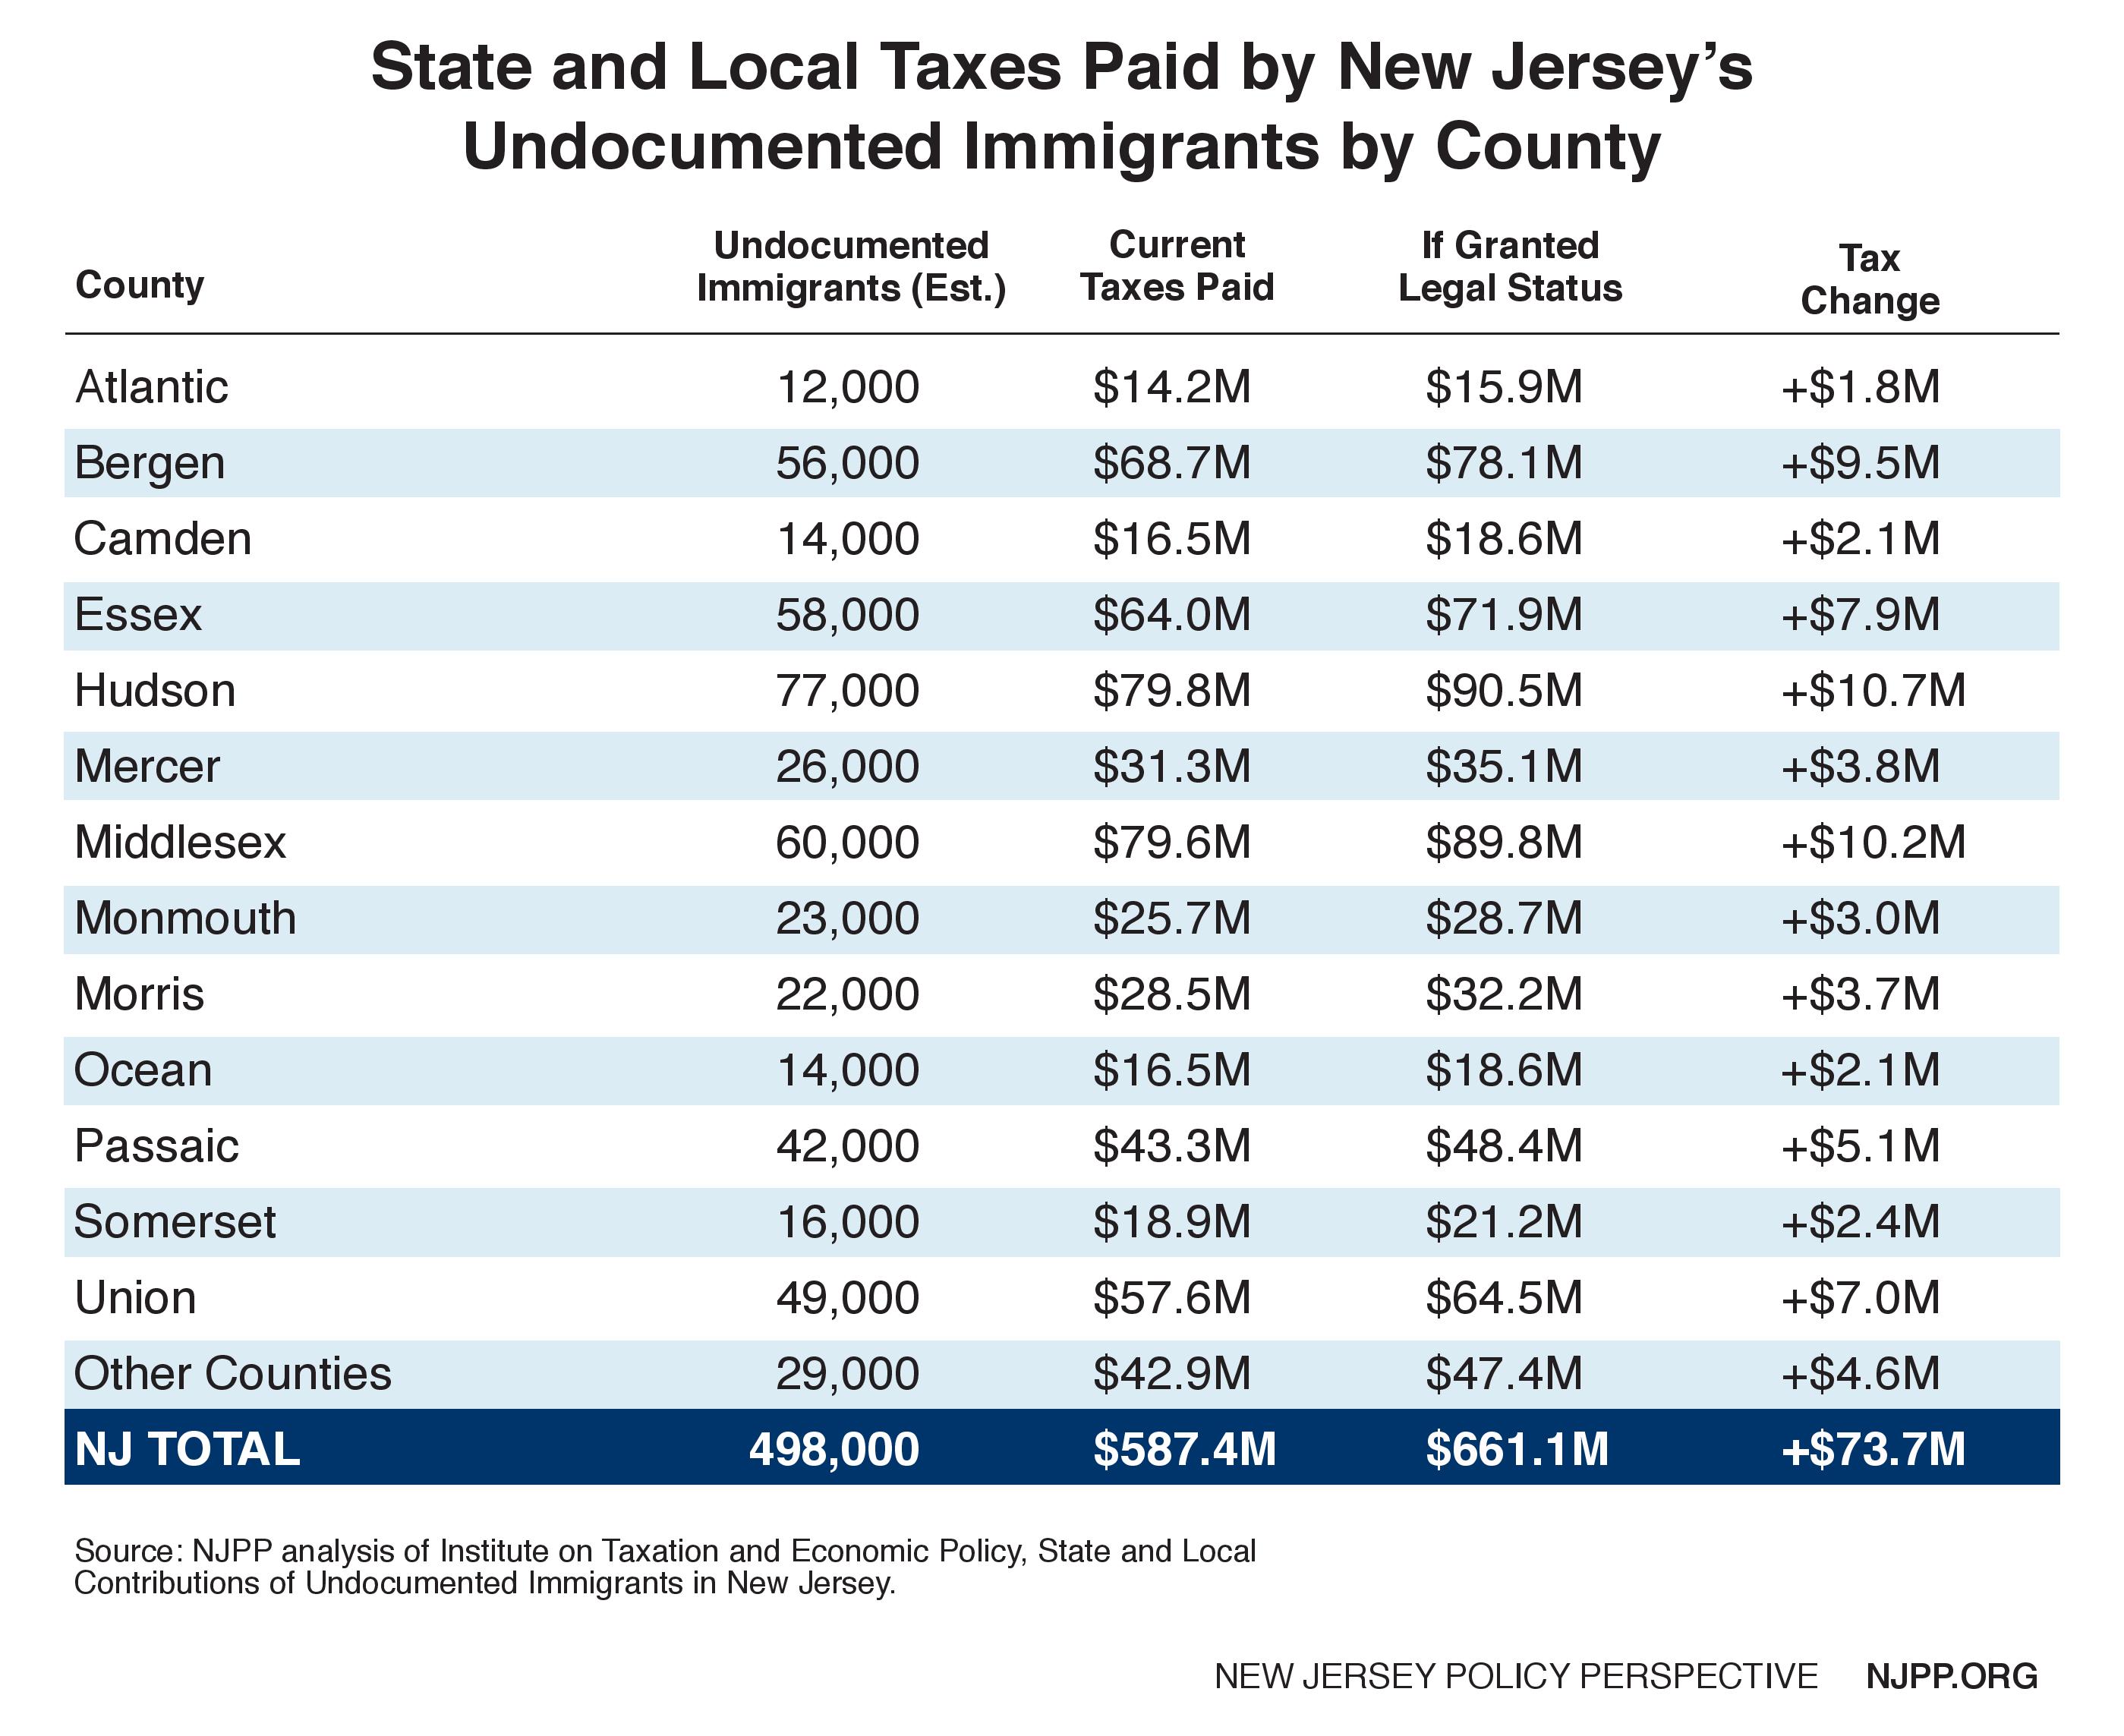 undocumented-immigrants-pay-taxes-county-breakdown-of-taxes-paid-new